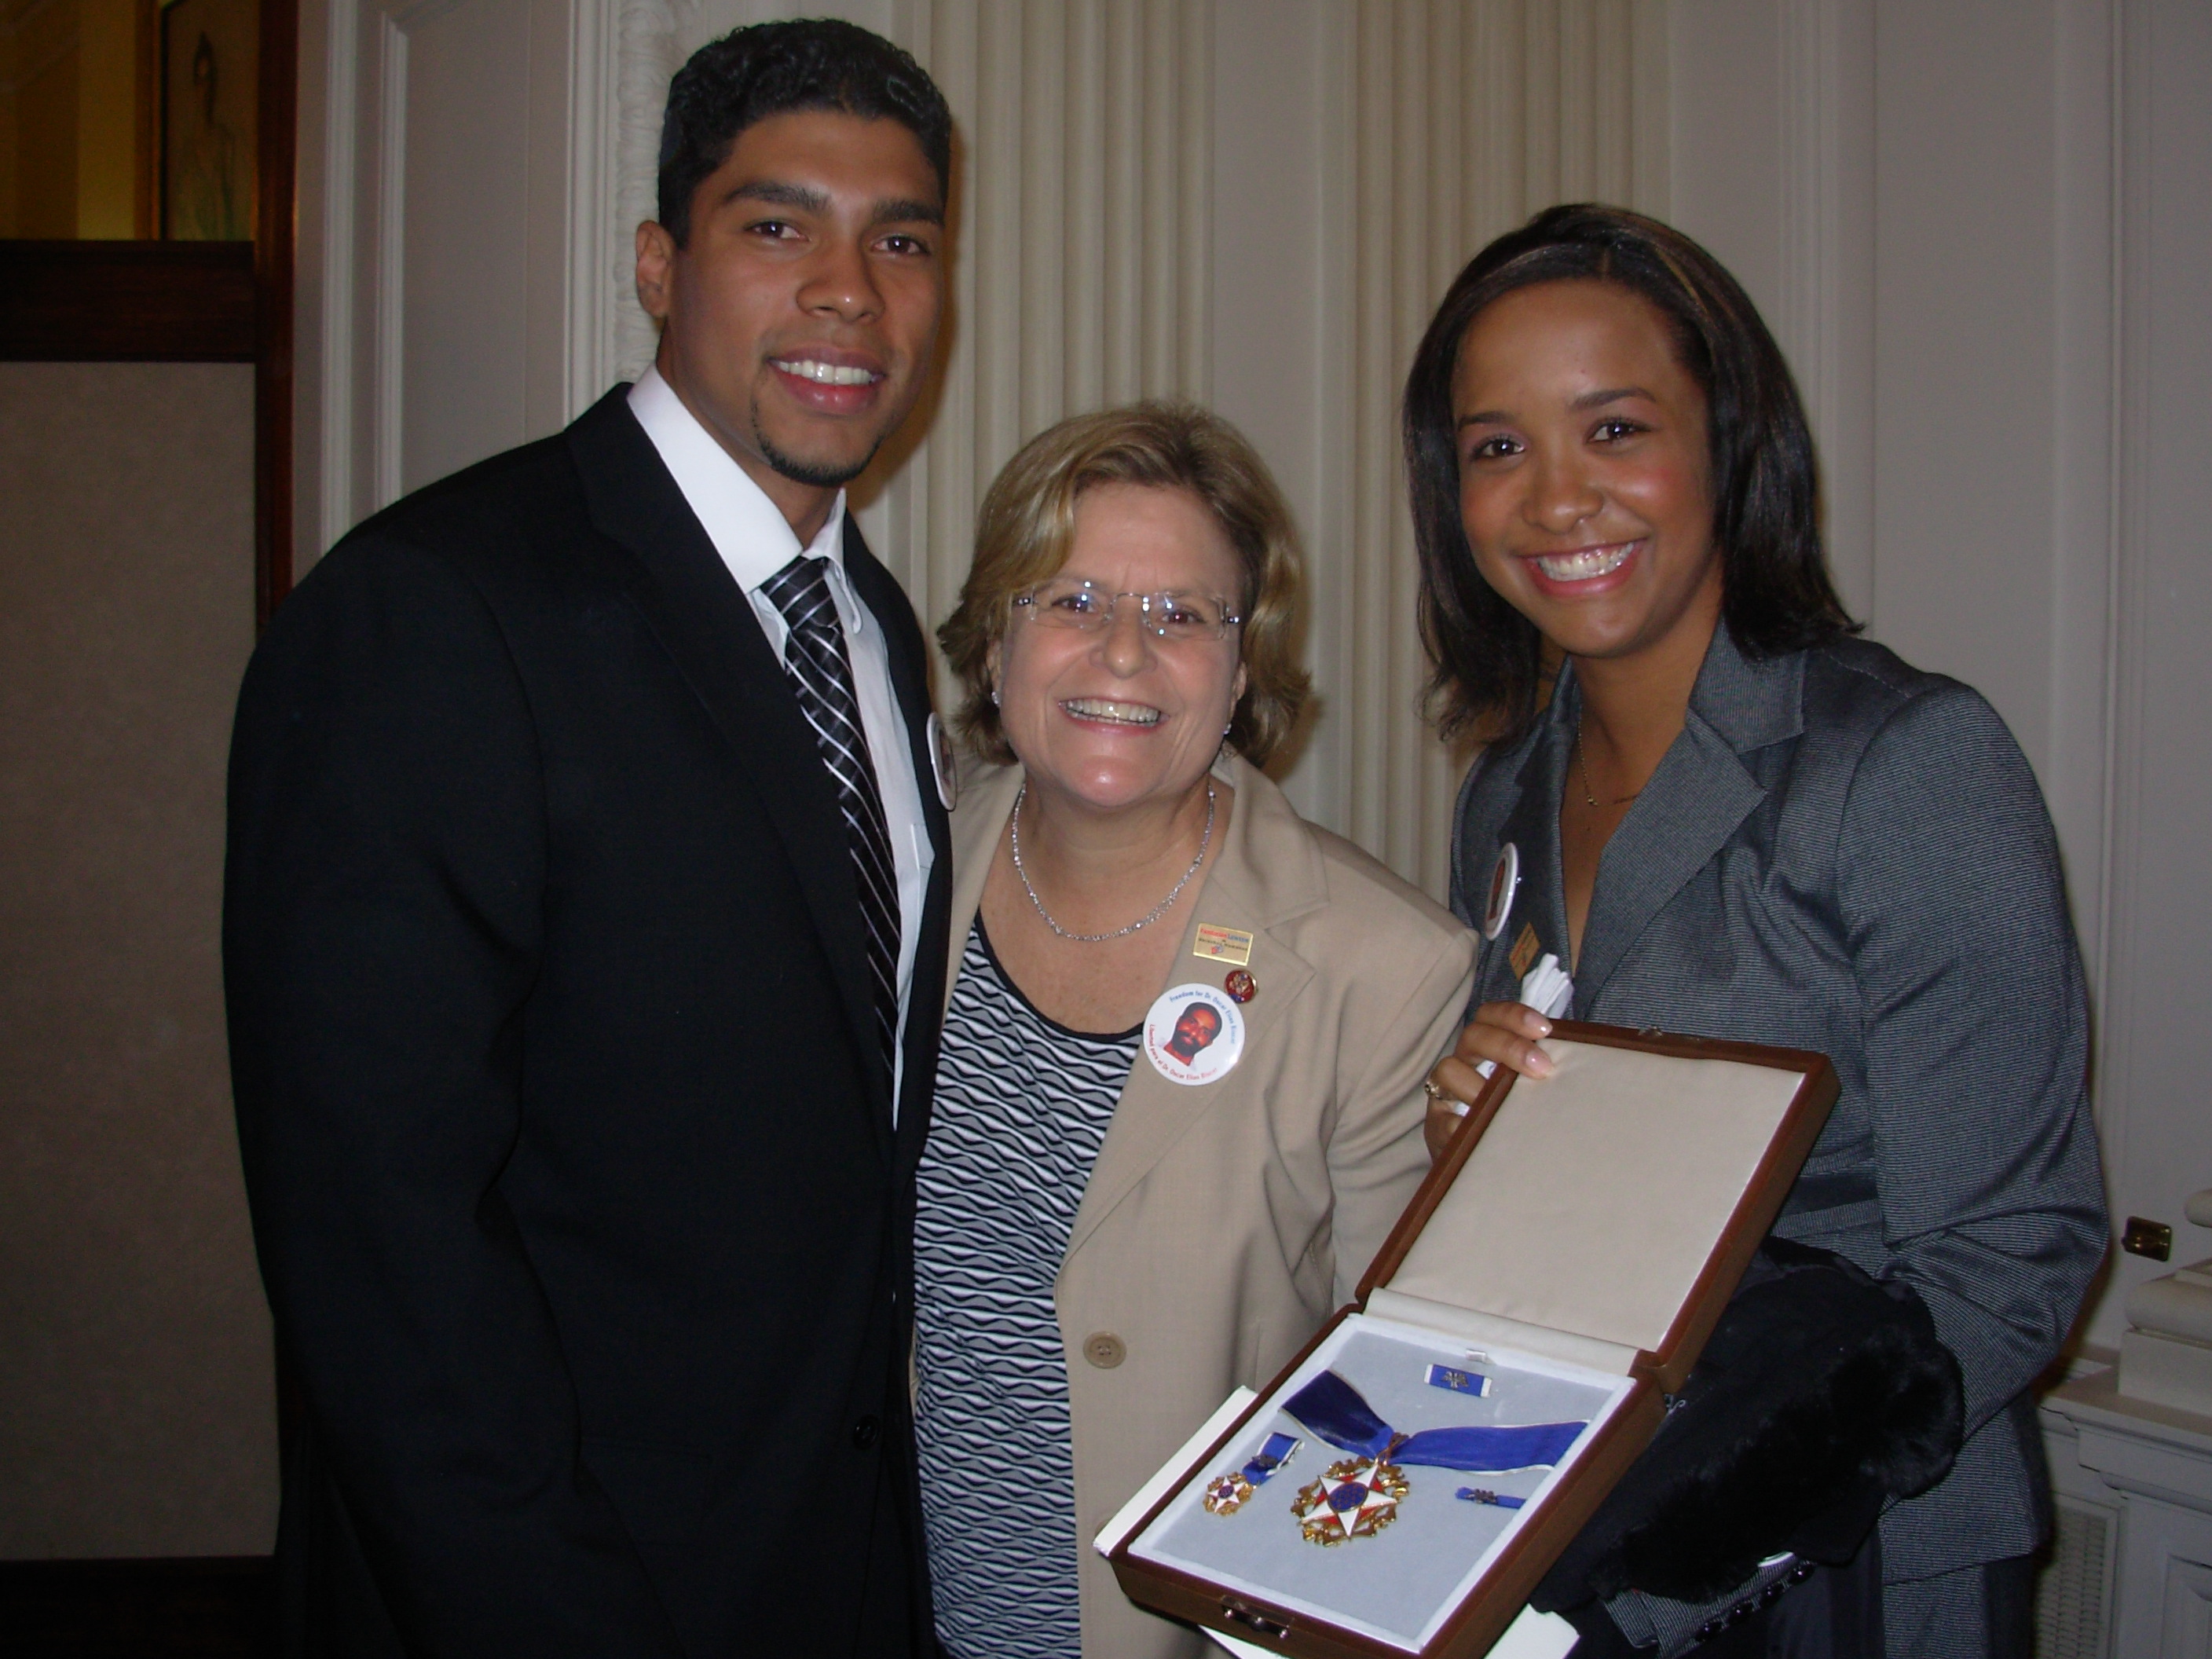 Ranking Member Ros-Lehtinen stands with Medal of Freedom recipient Oscar Elias Biscet's children (son) Yan Valdes and (daughter) Winnie following the White House Medal of Freedom Ceremony